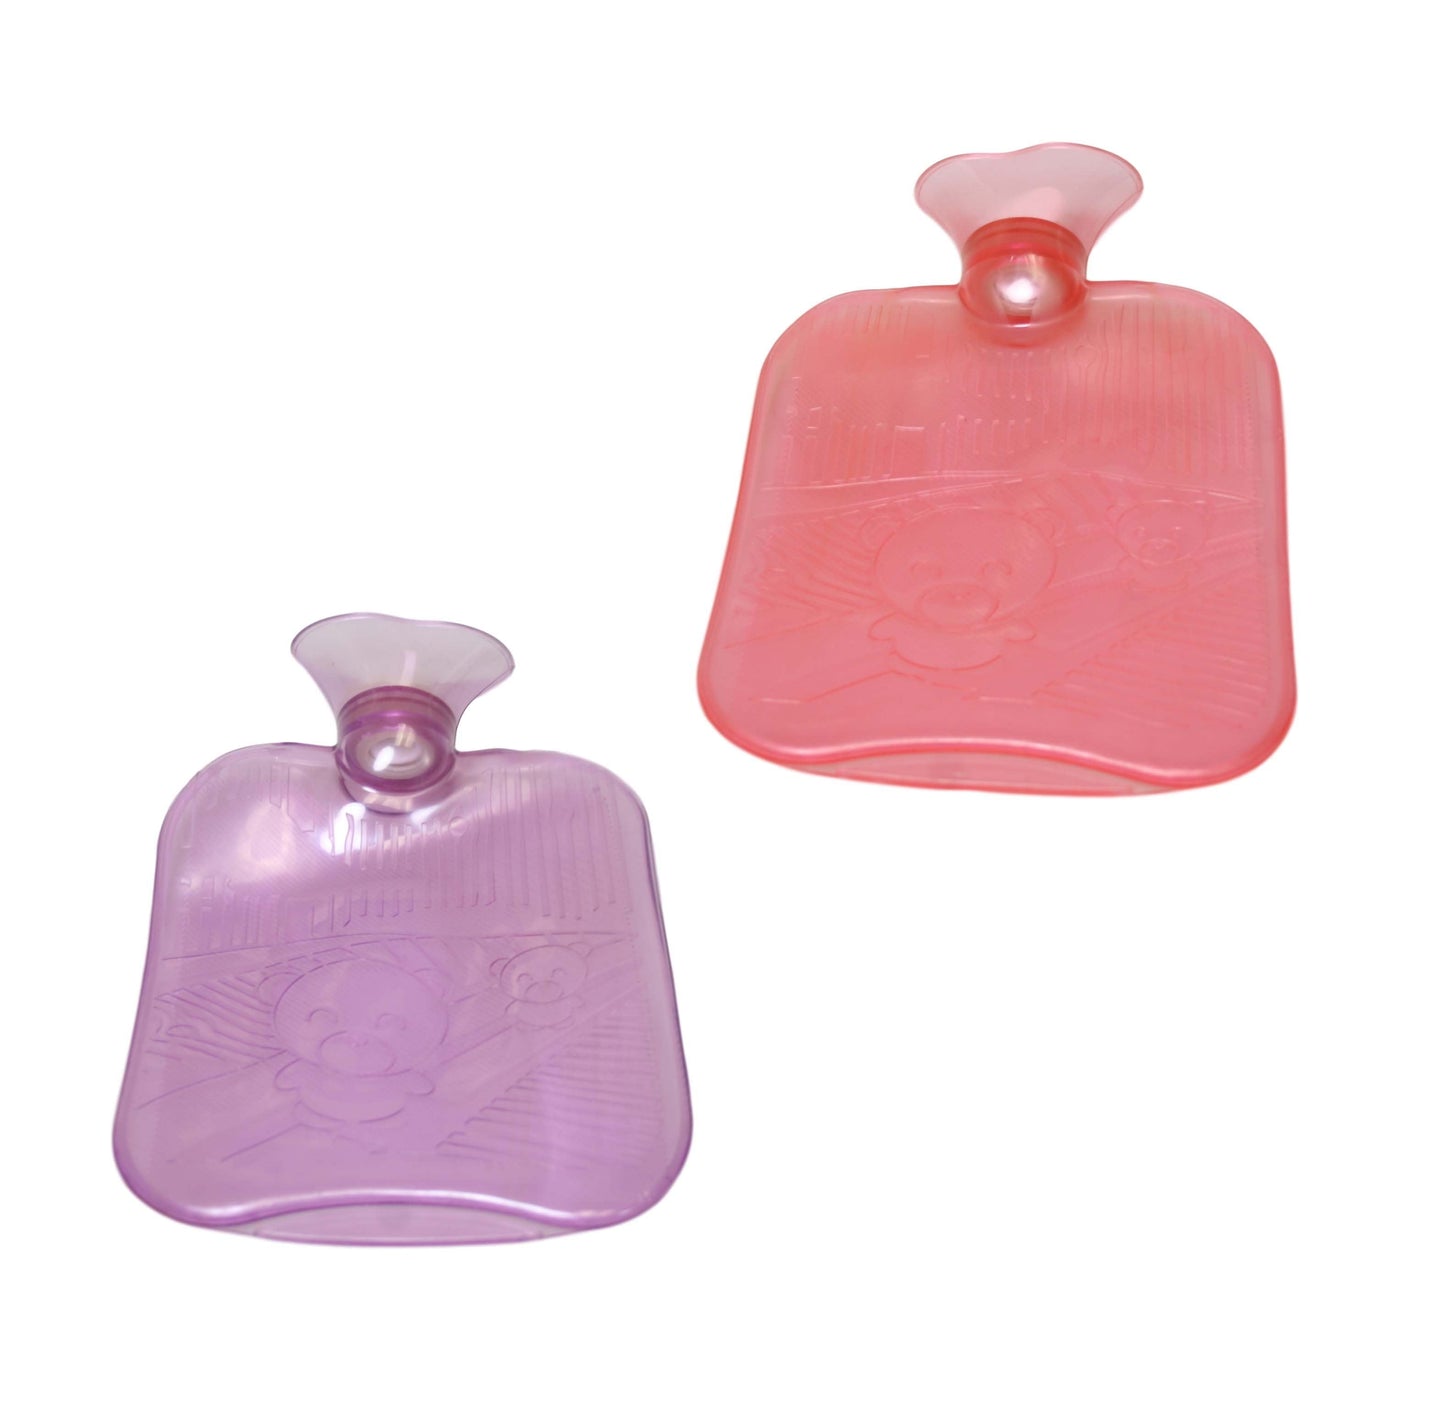 Clear Silicone Hot Water Bottle Red/Purple Hot Therapy Pain Relief Water Bottle 18cm x 20cm 6433 1 ltr  (Parcel Rate)